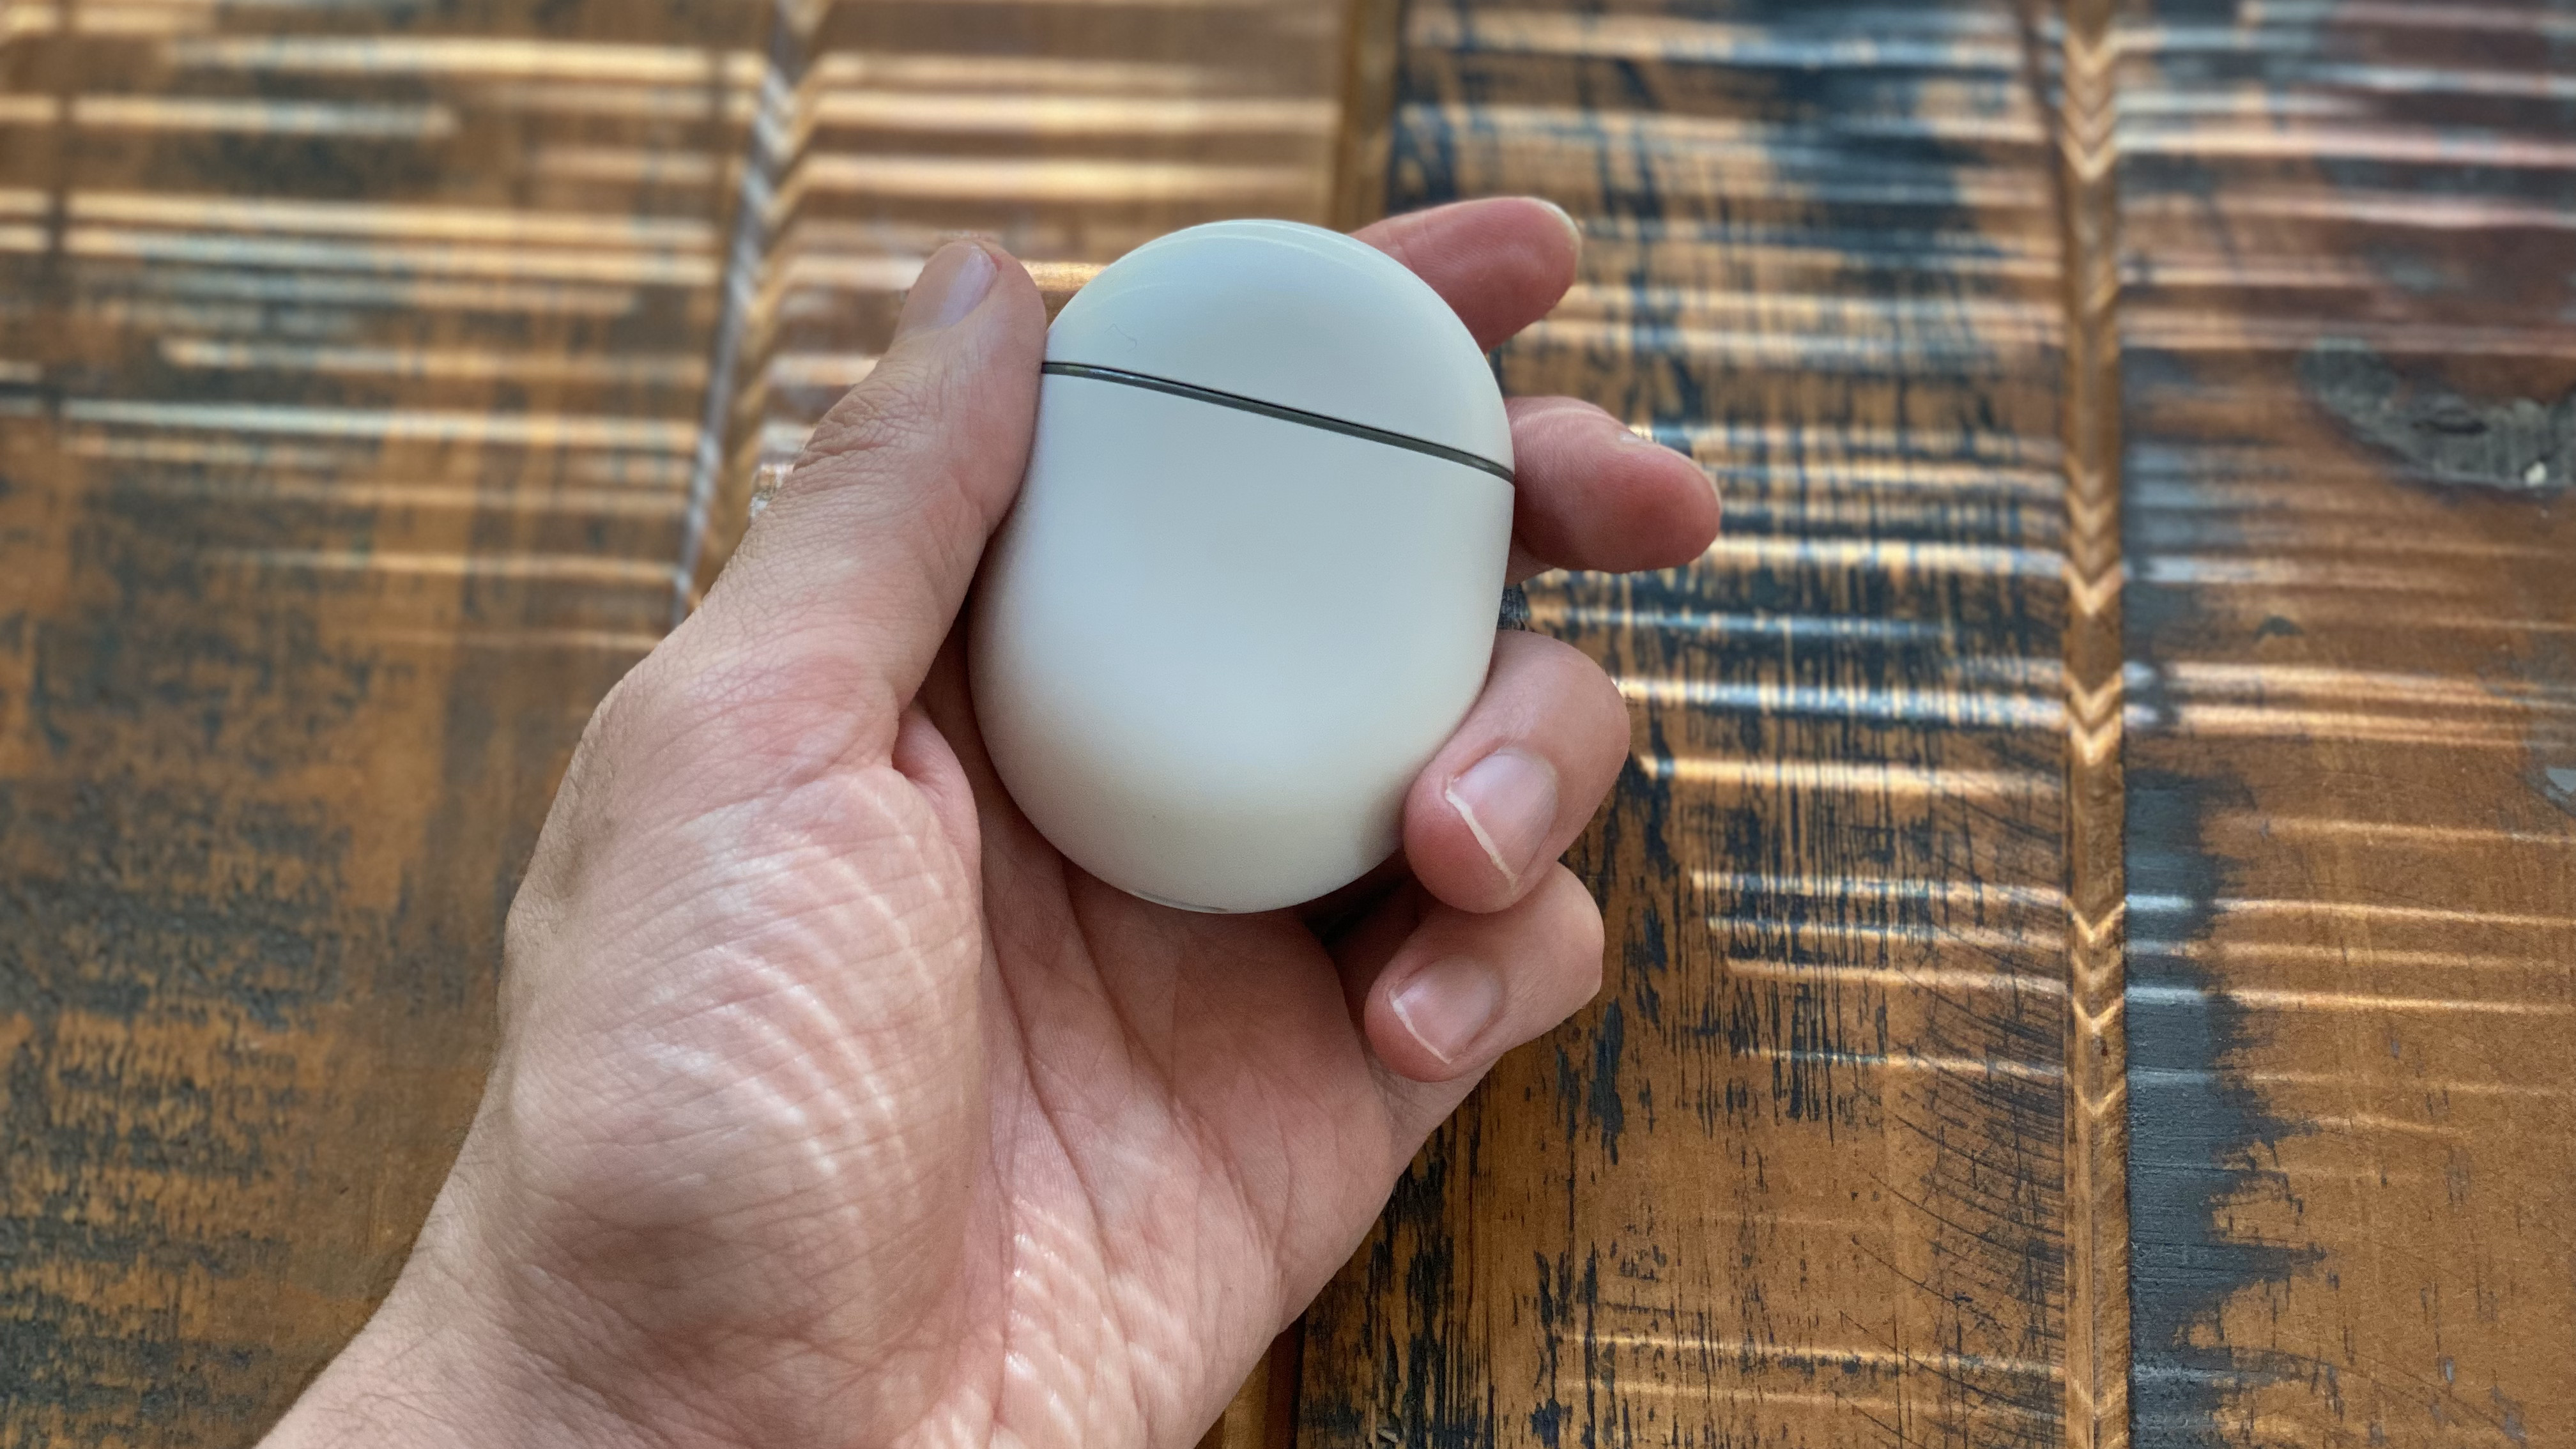 Google Pixel Buds A-Series on the table